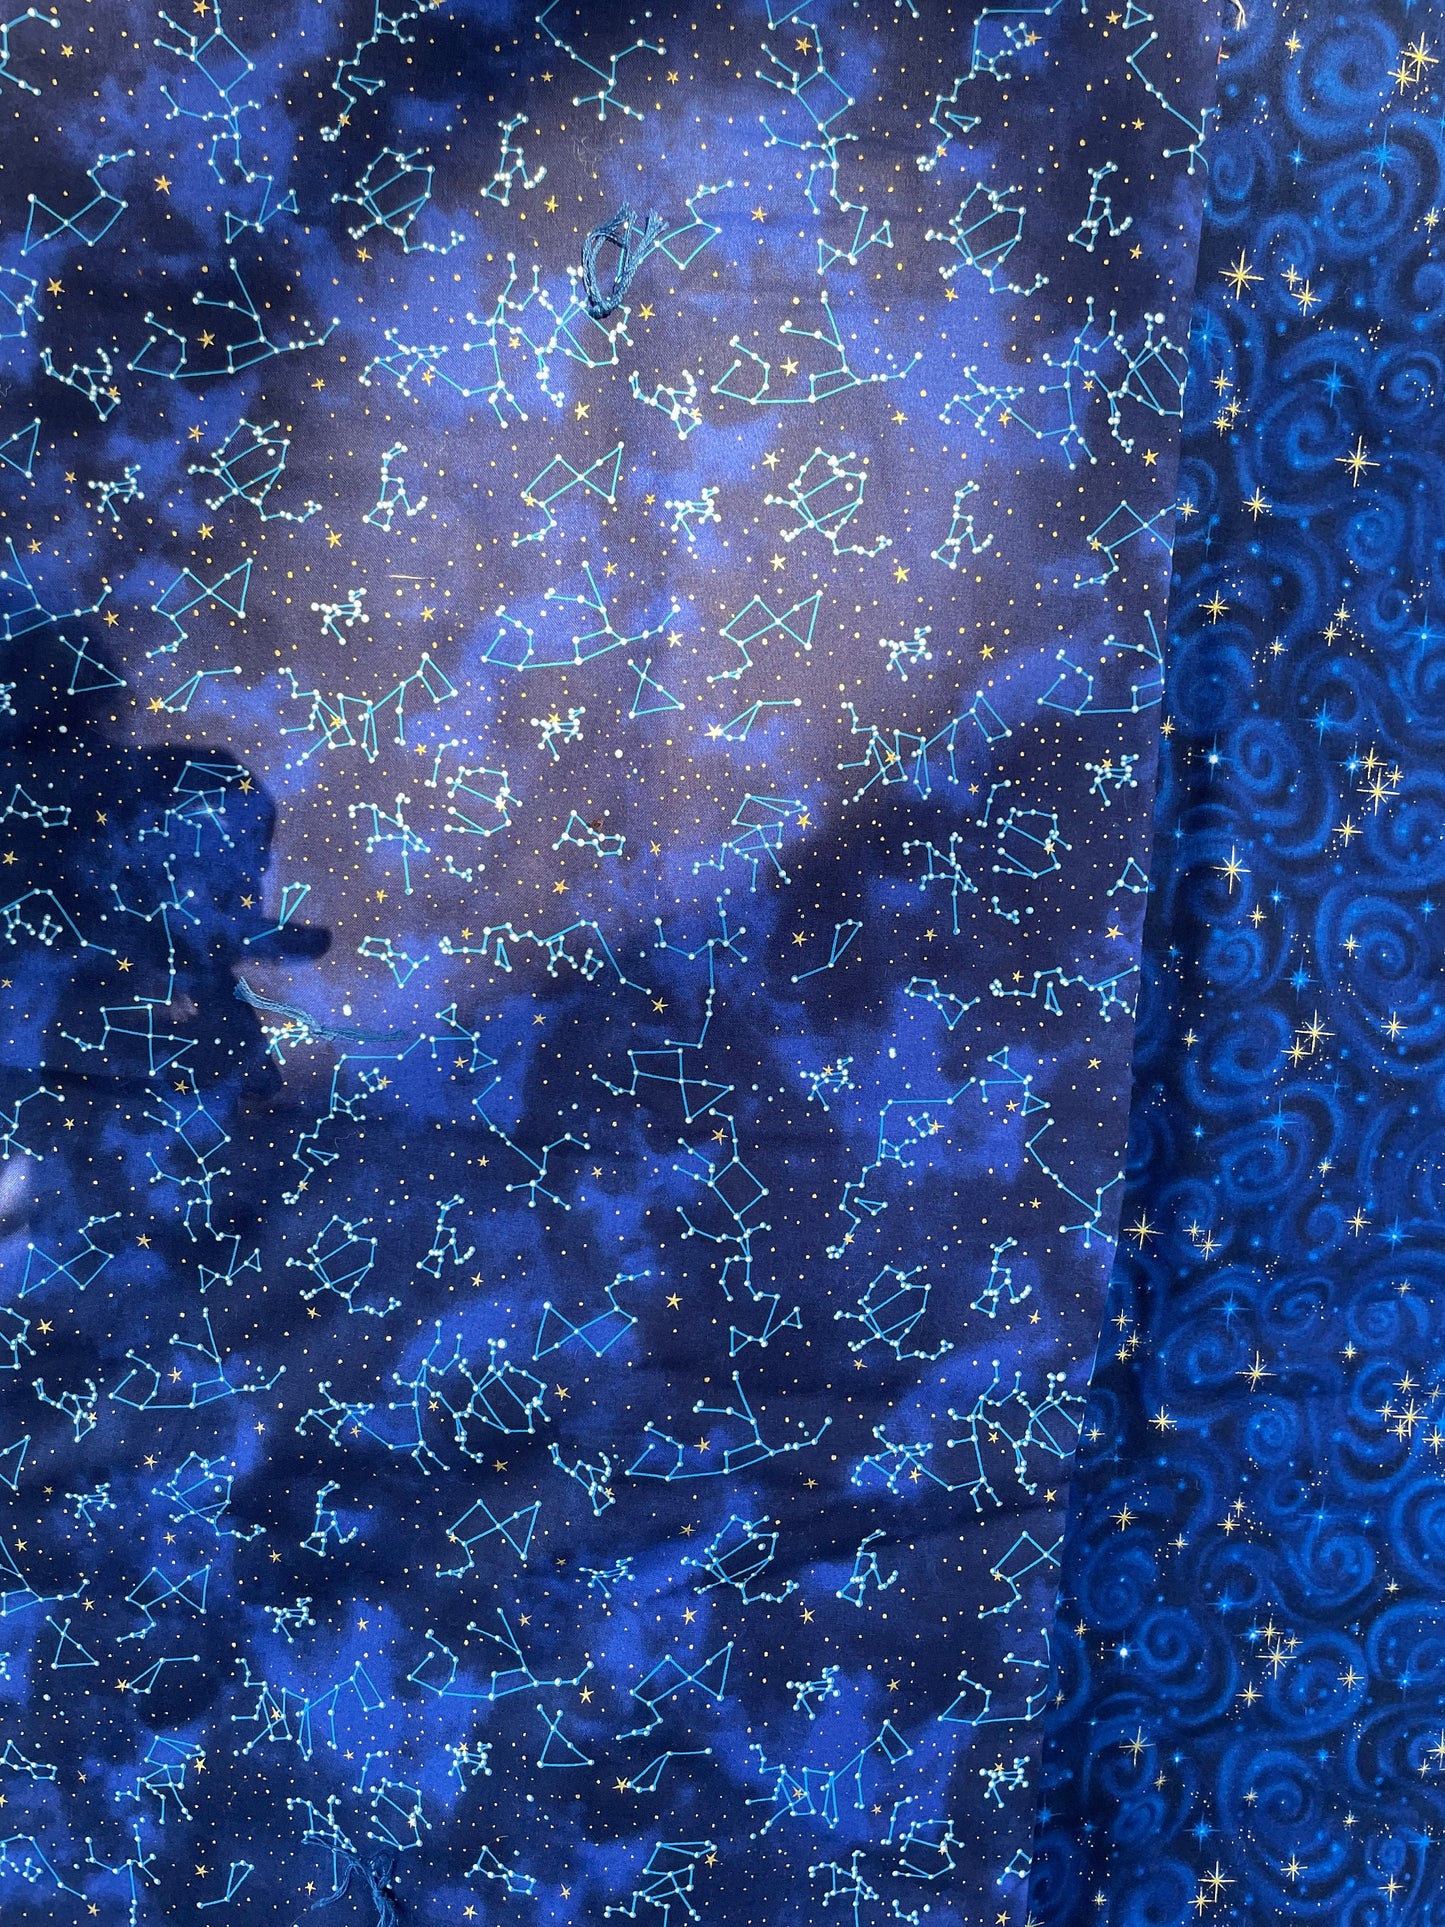 Stunning Constellation and Stars Throw/Lap quilt